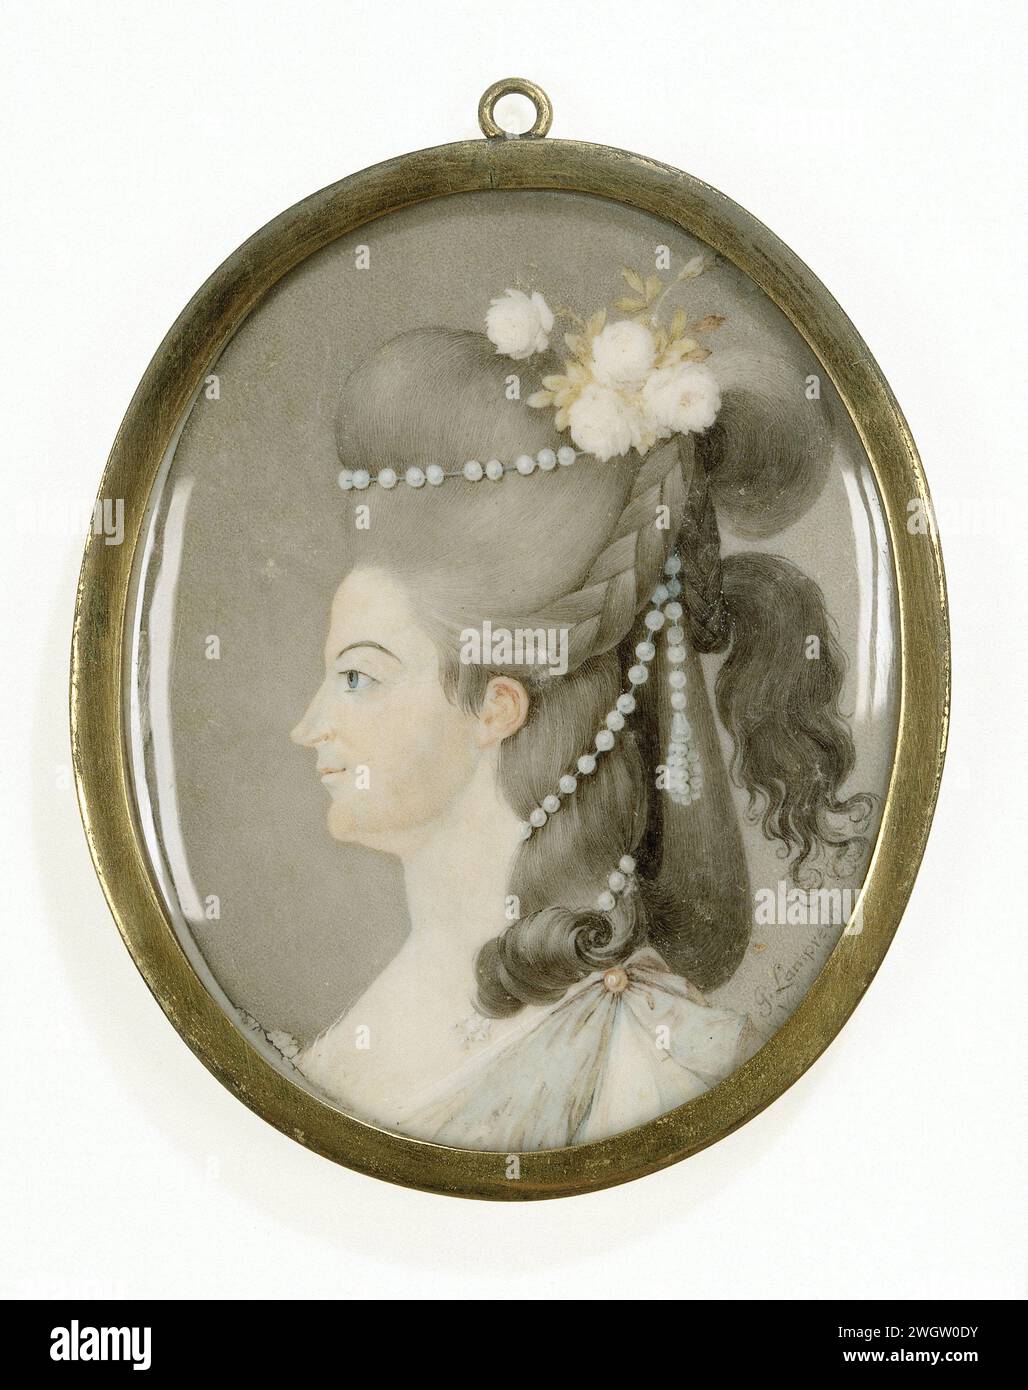 Frederika Sophia Wilhelmina (1751-1820), princess of Prussia. Wife of Prince Willem V, Georg Lamprecht, 1780 miniature (painting) Portrait of Frederika Sophia Wilhelmina (1751-1820), princess of Prussia. Wife of Prince Willem V. Buste, in profile to the left. Pearls and flowers in the hair. Part of the portrait miniatures collection.  ivory. metal. glass  historical persons - BB - woman Stock Photo